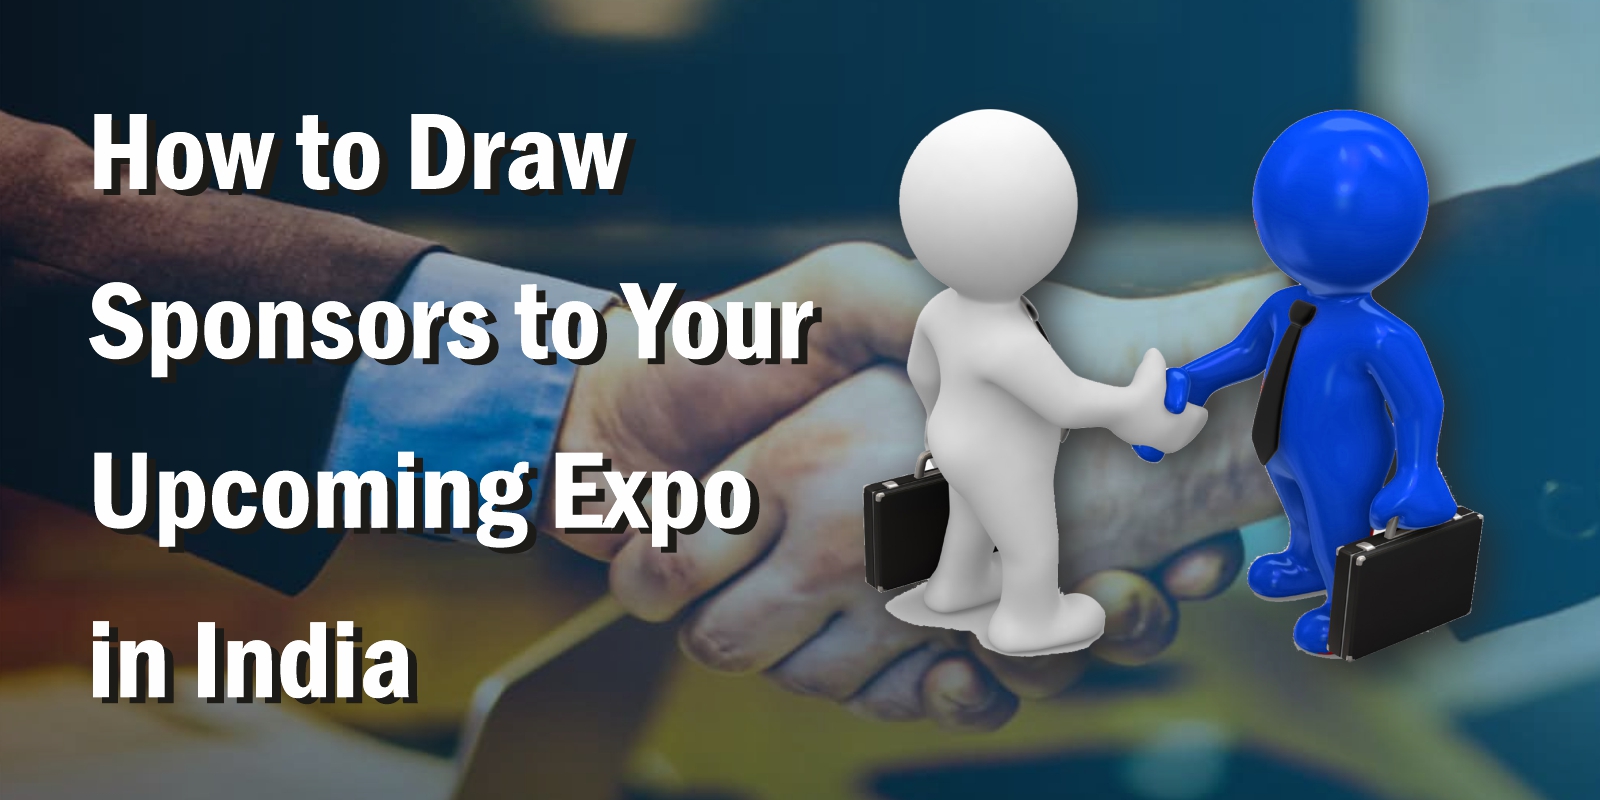 How to Draw Sponsors to Your Upcoming Expo in India